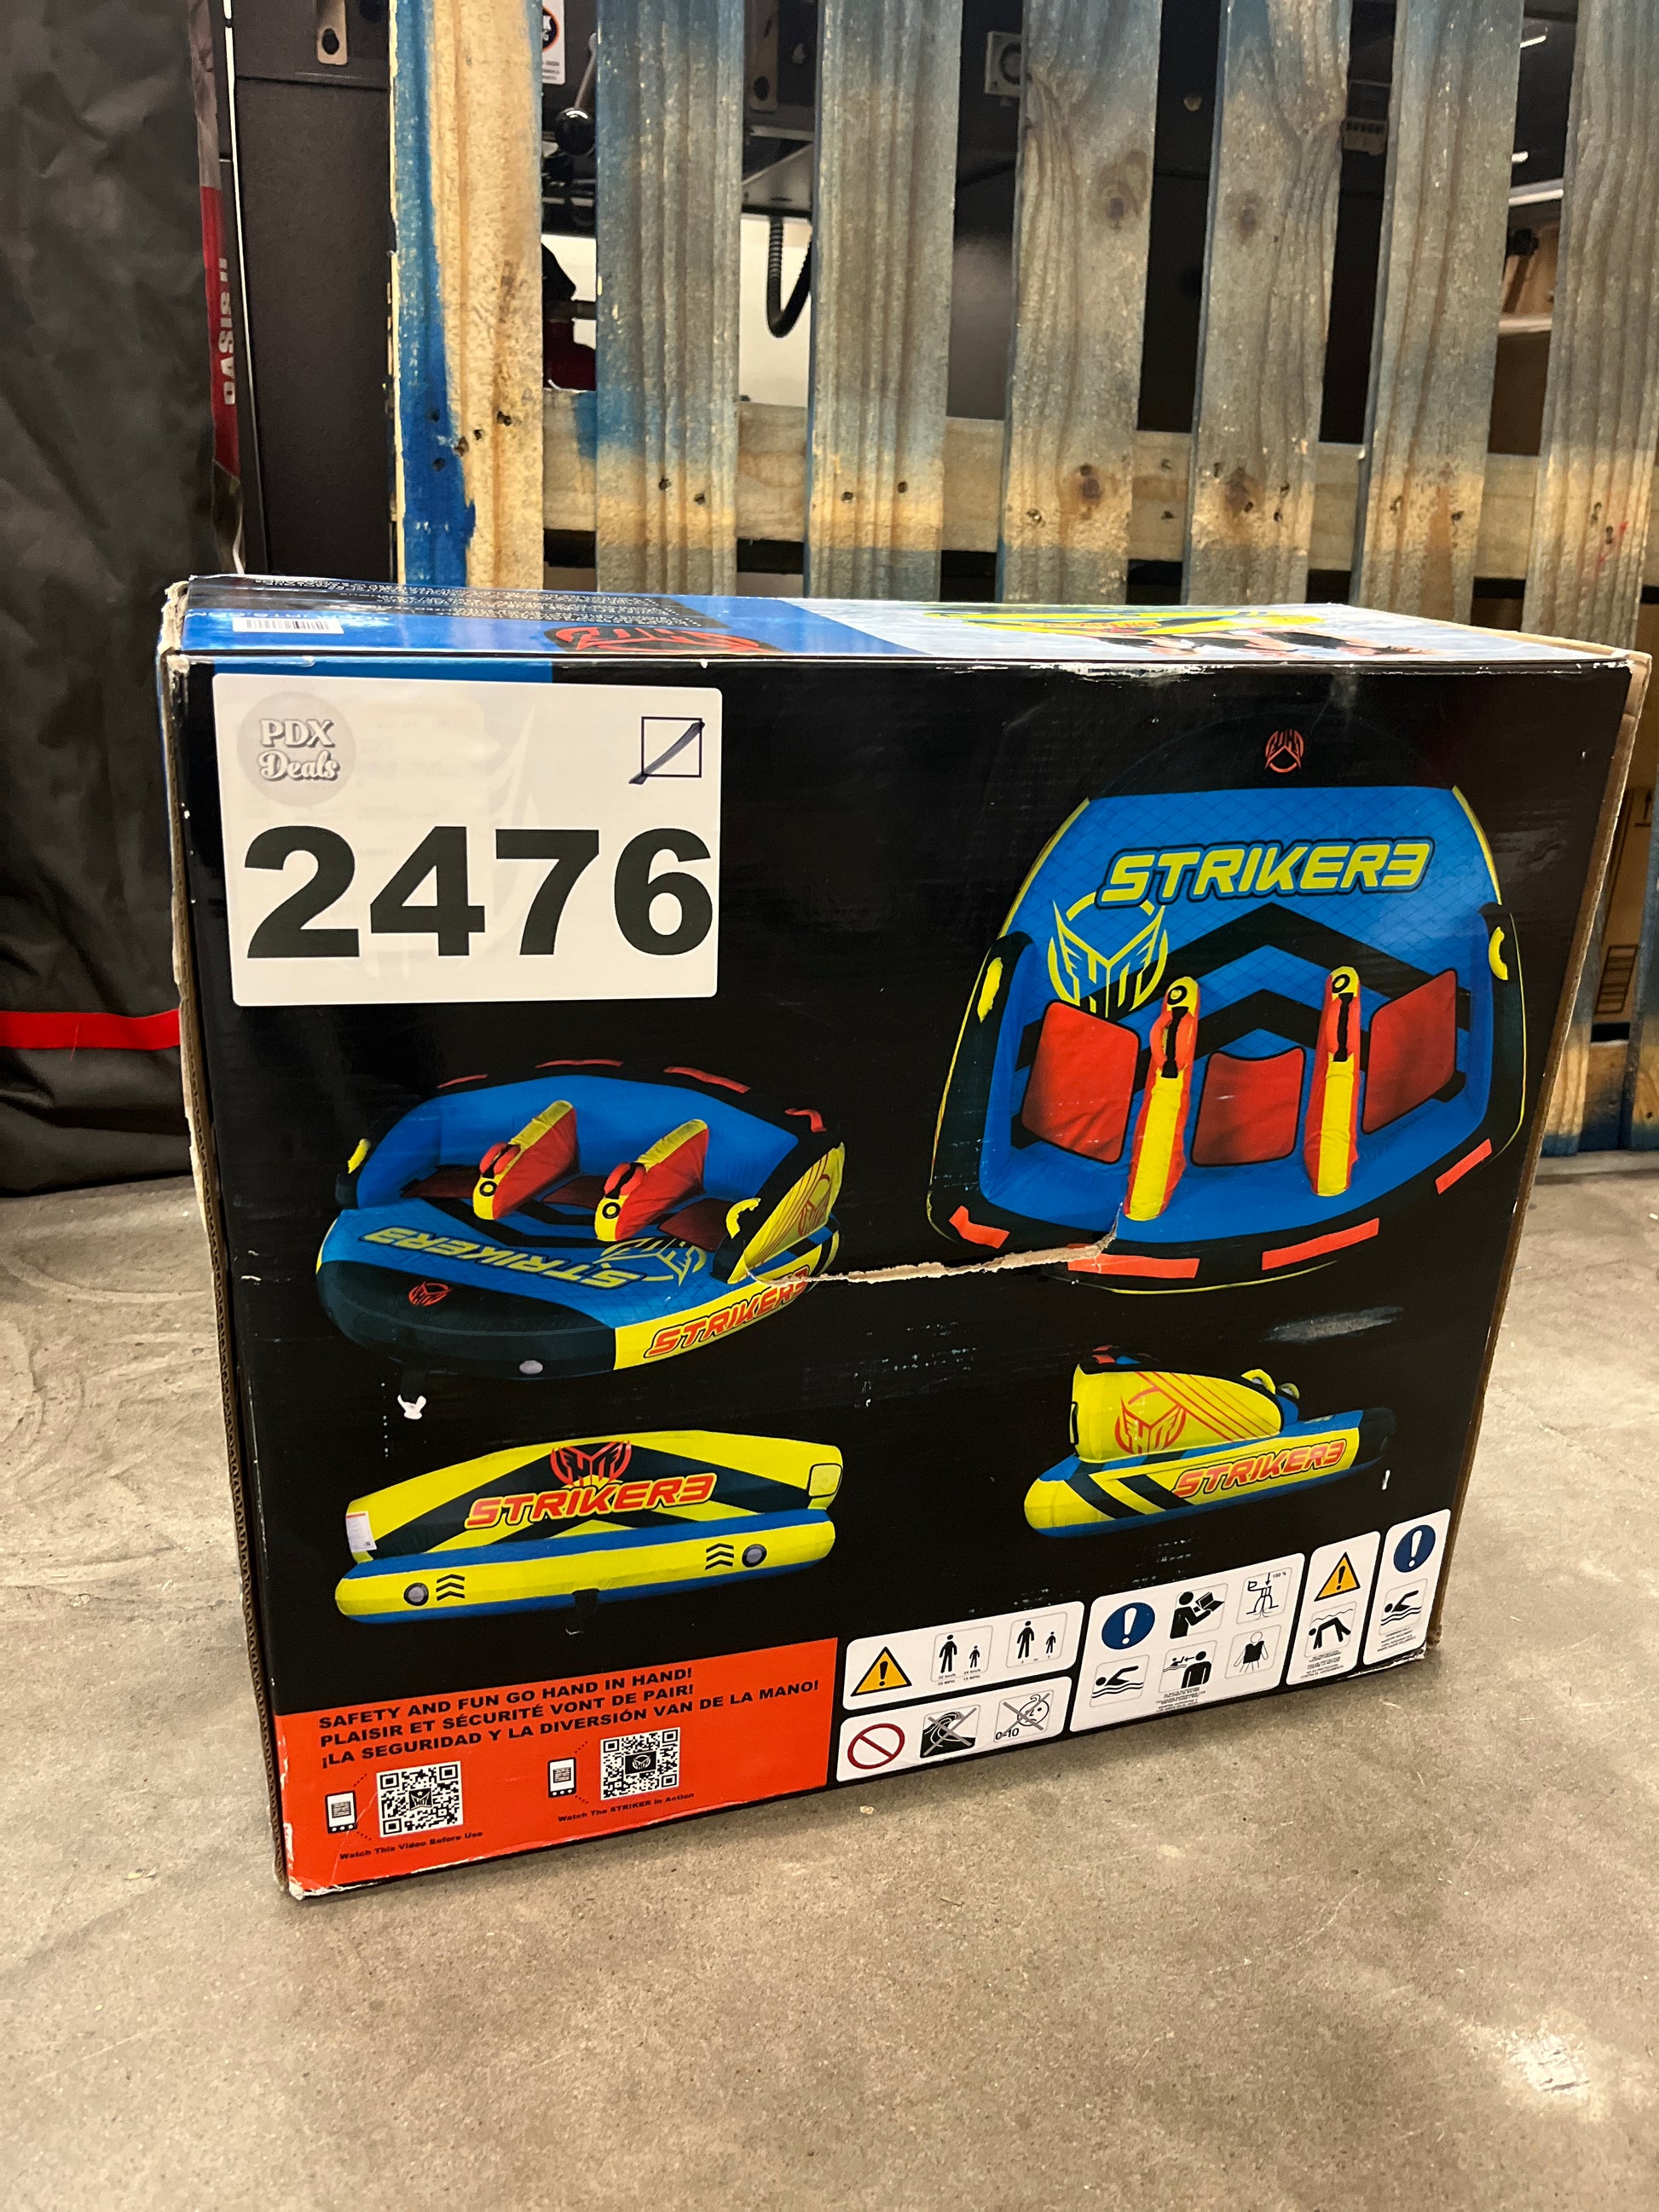 Costco - HO Sports Striker 3 Towable with Rope and 12V Pump - Retail $199